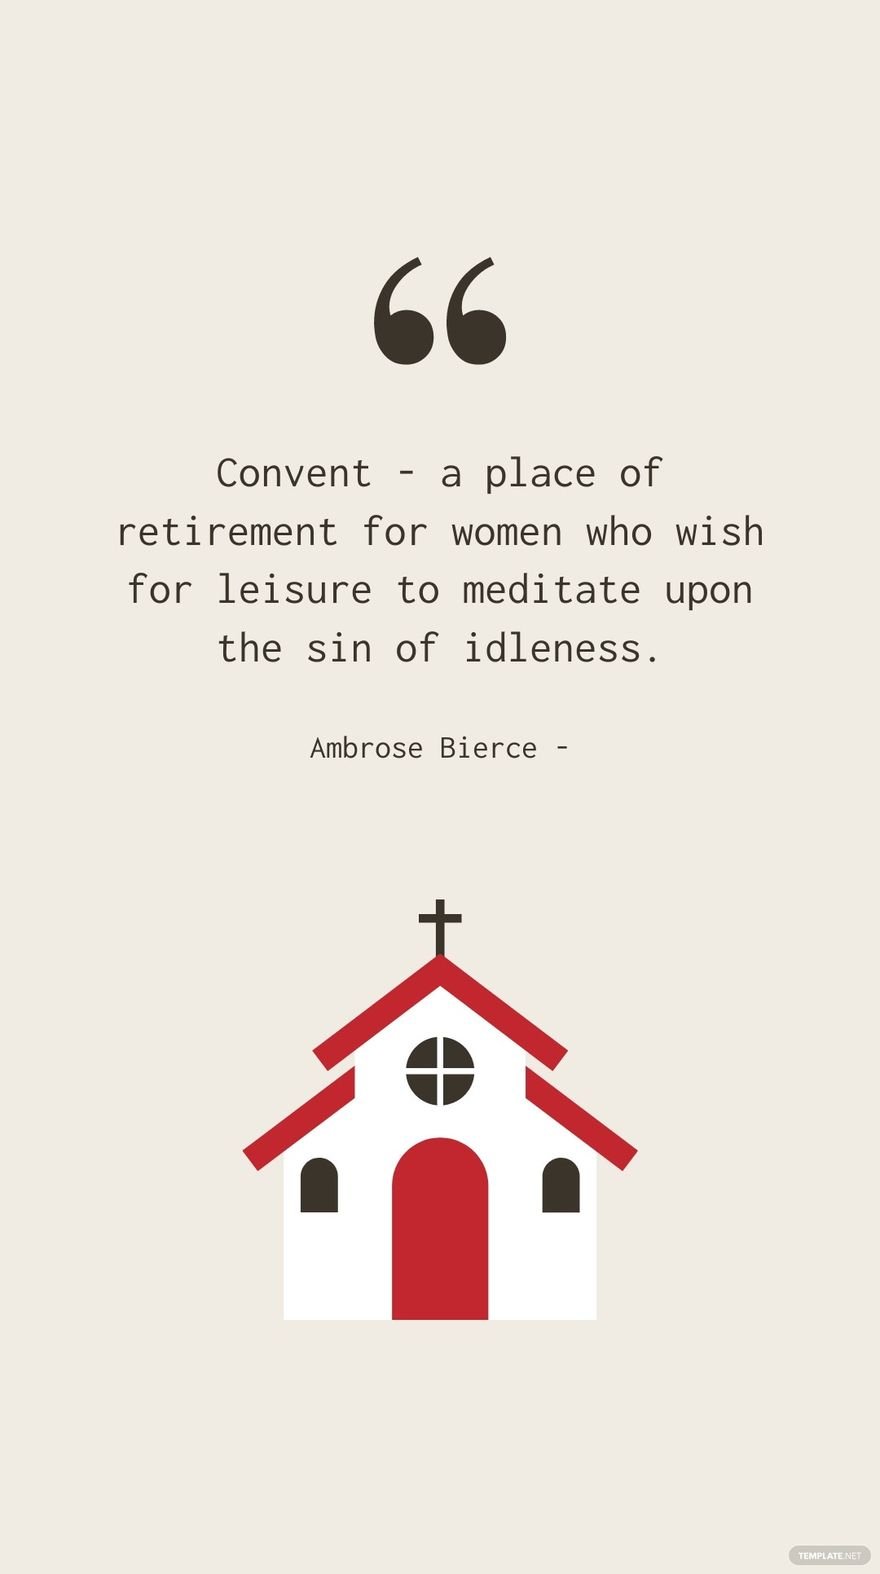 Free Ambrose Bierce - Convent - a place of retirement for women who wish for leisure to meditate upon the sin of idleness. in JPG